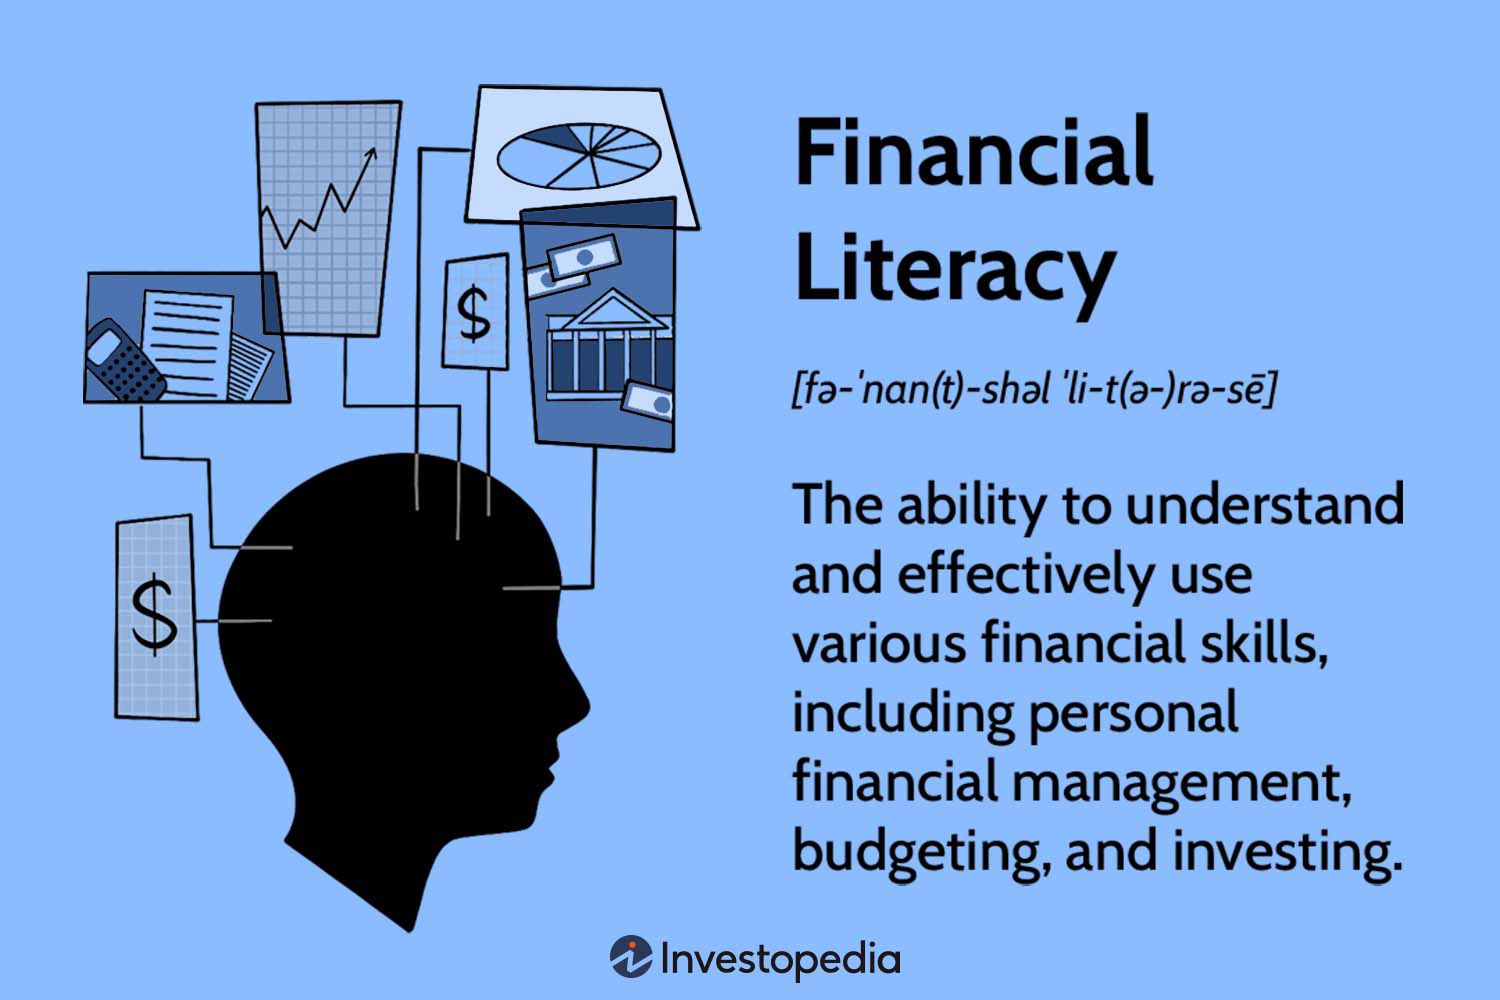 How Can I Build Financial Literacy To Make Informed Decisions About Mortgages And Homeownership?